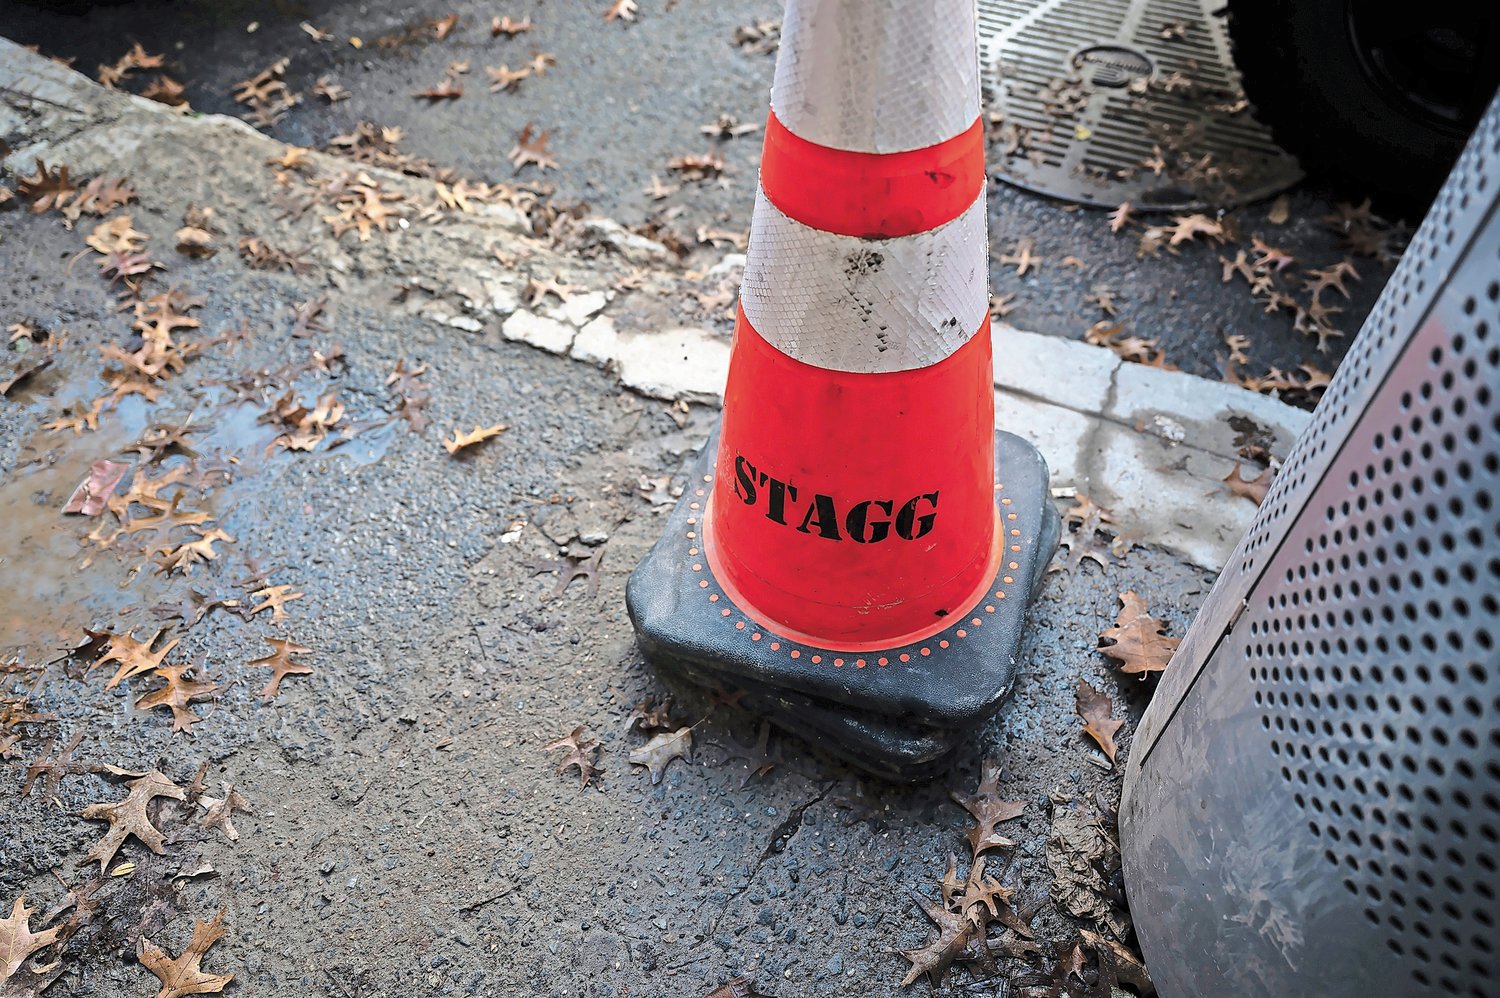 Stagg branded traffic cones at 3745 Riverdale Avenue, where a couple of lawsuits were filed for a dangerous sidewalk there.